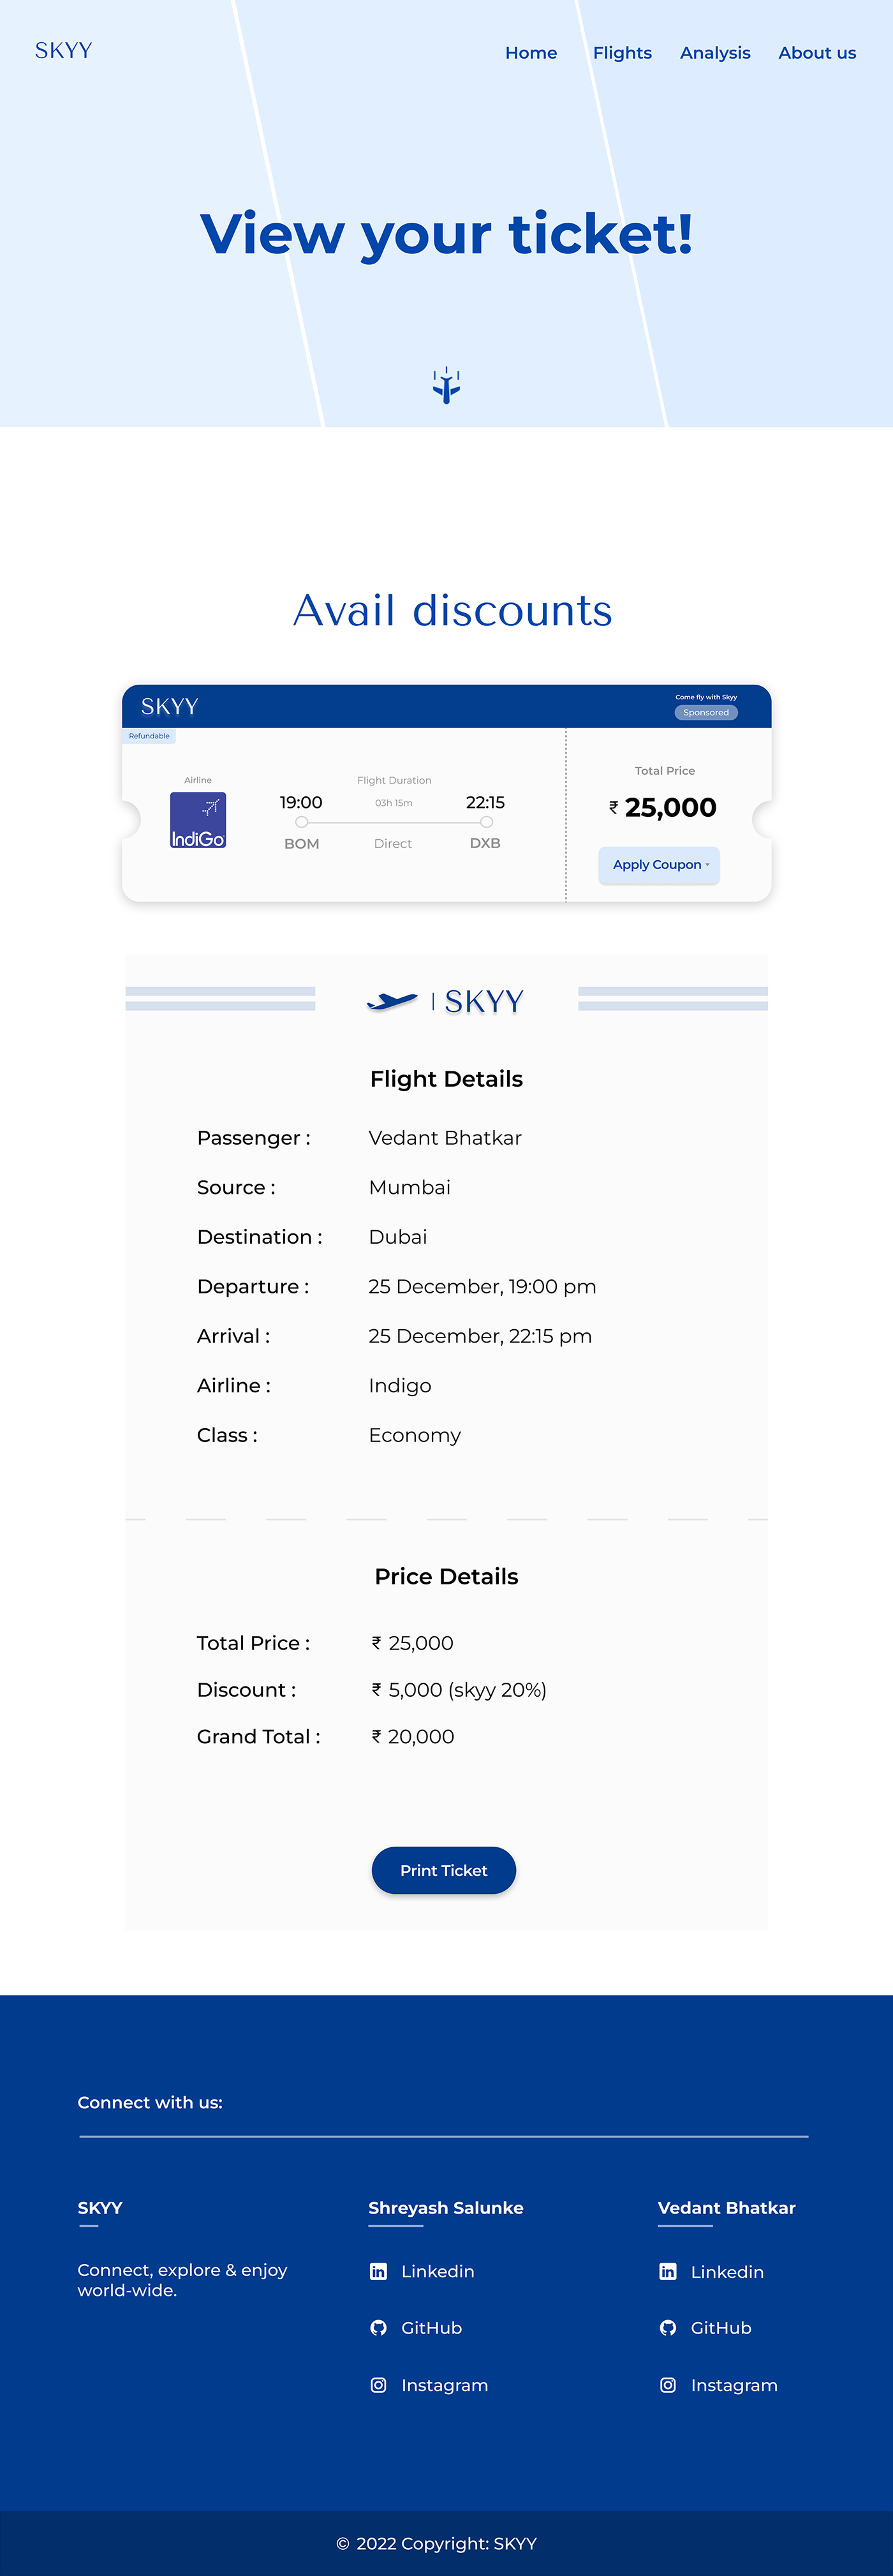 Ticket Booking Page of SKYY Website